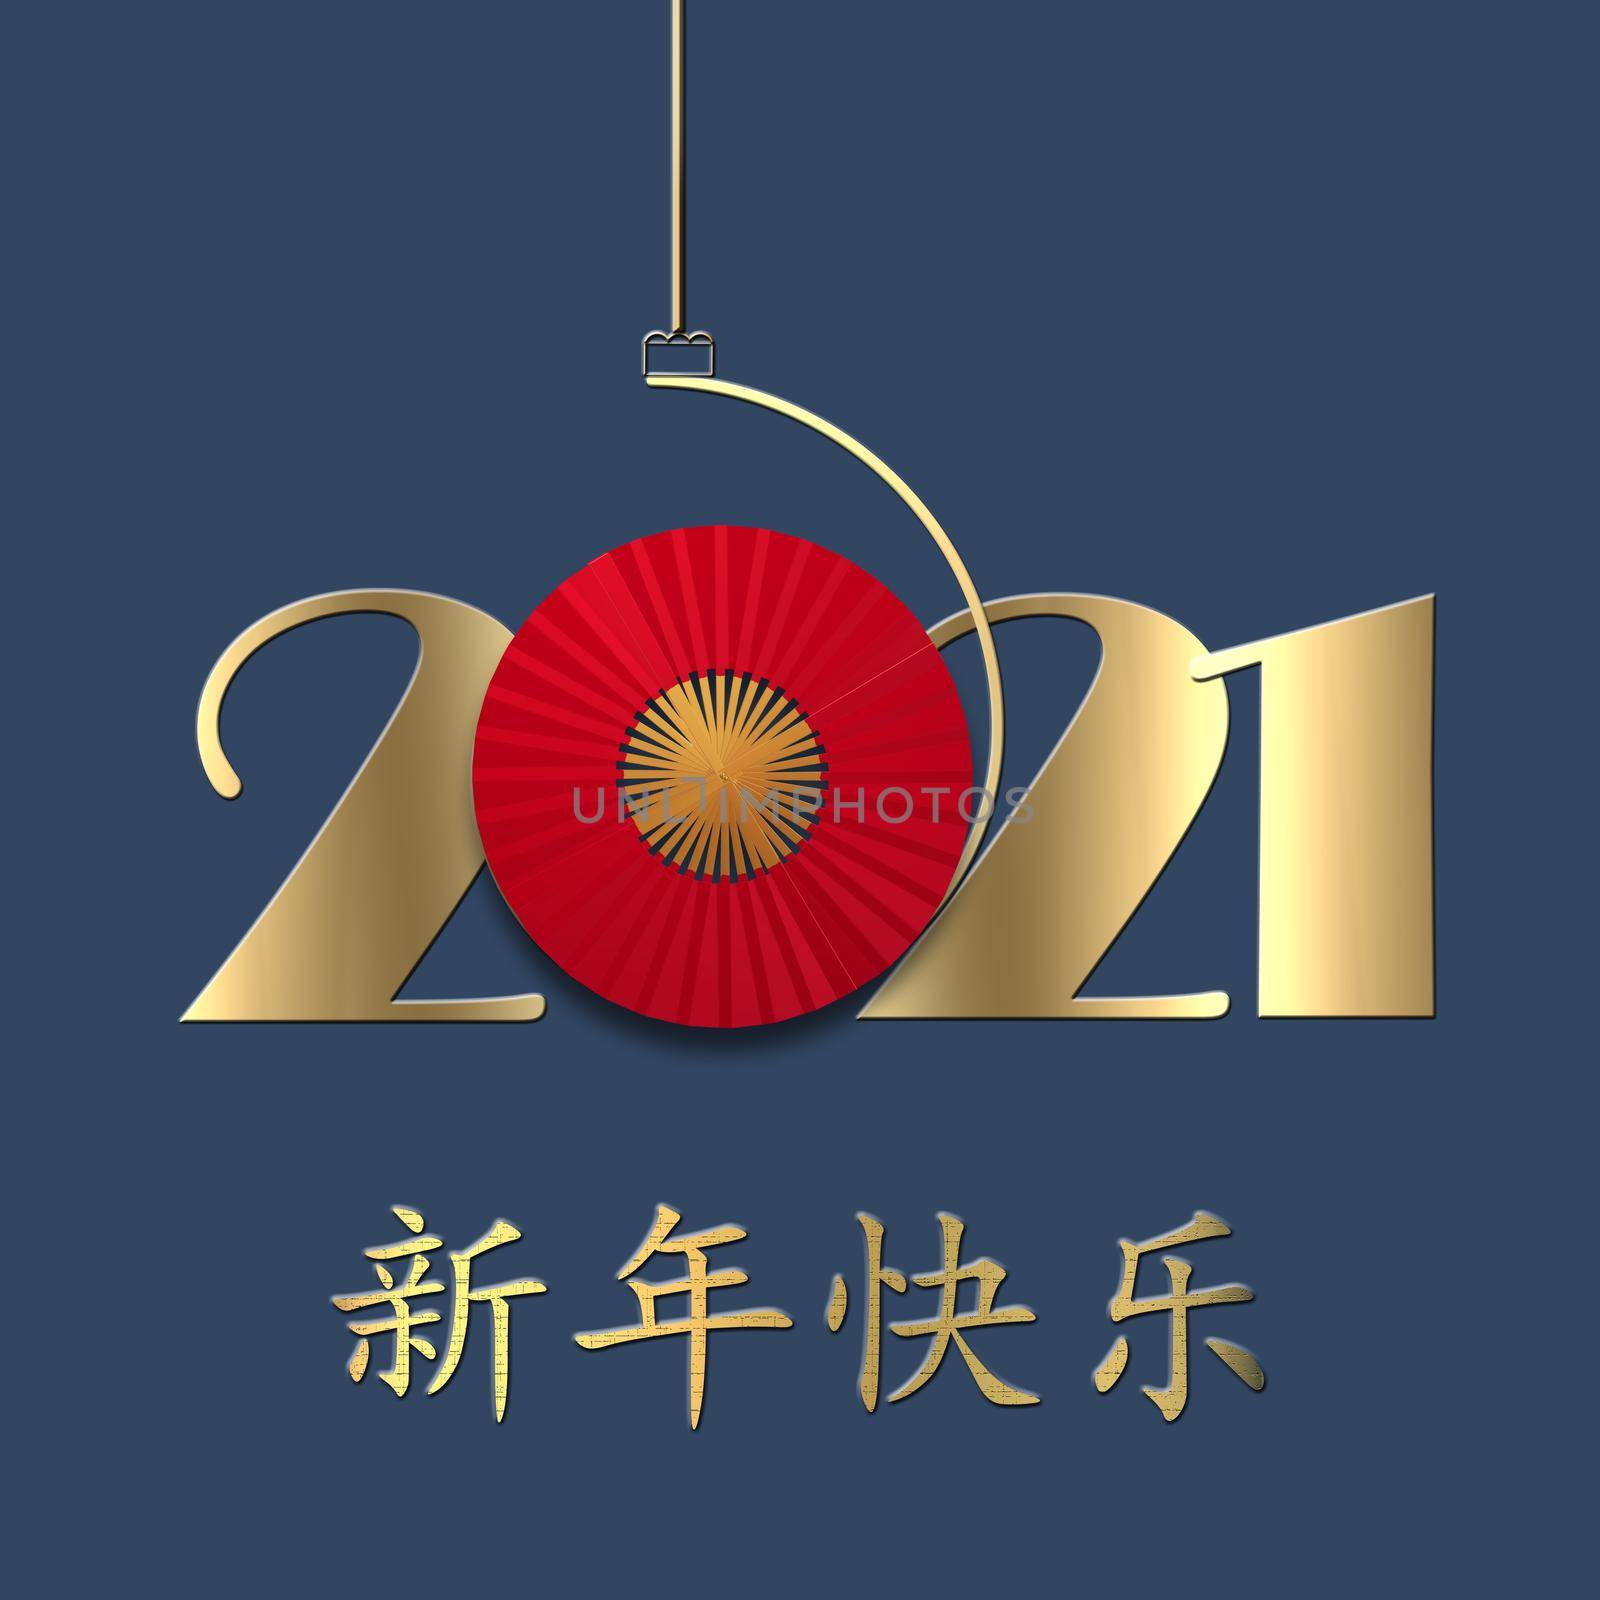 Chinese 2021 New Year on blue background. Gold text Happy Chinese new year, digit 2021, fan Design for greetings, oriental new year card. 3D illustration